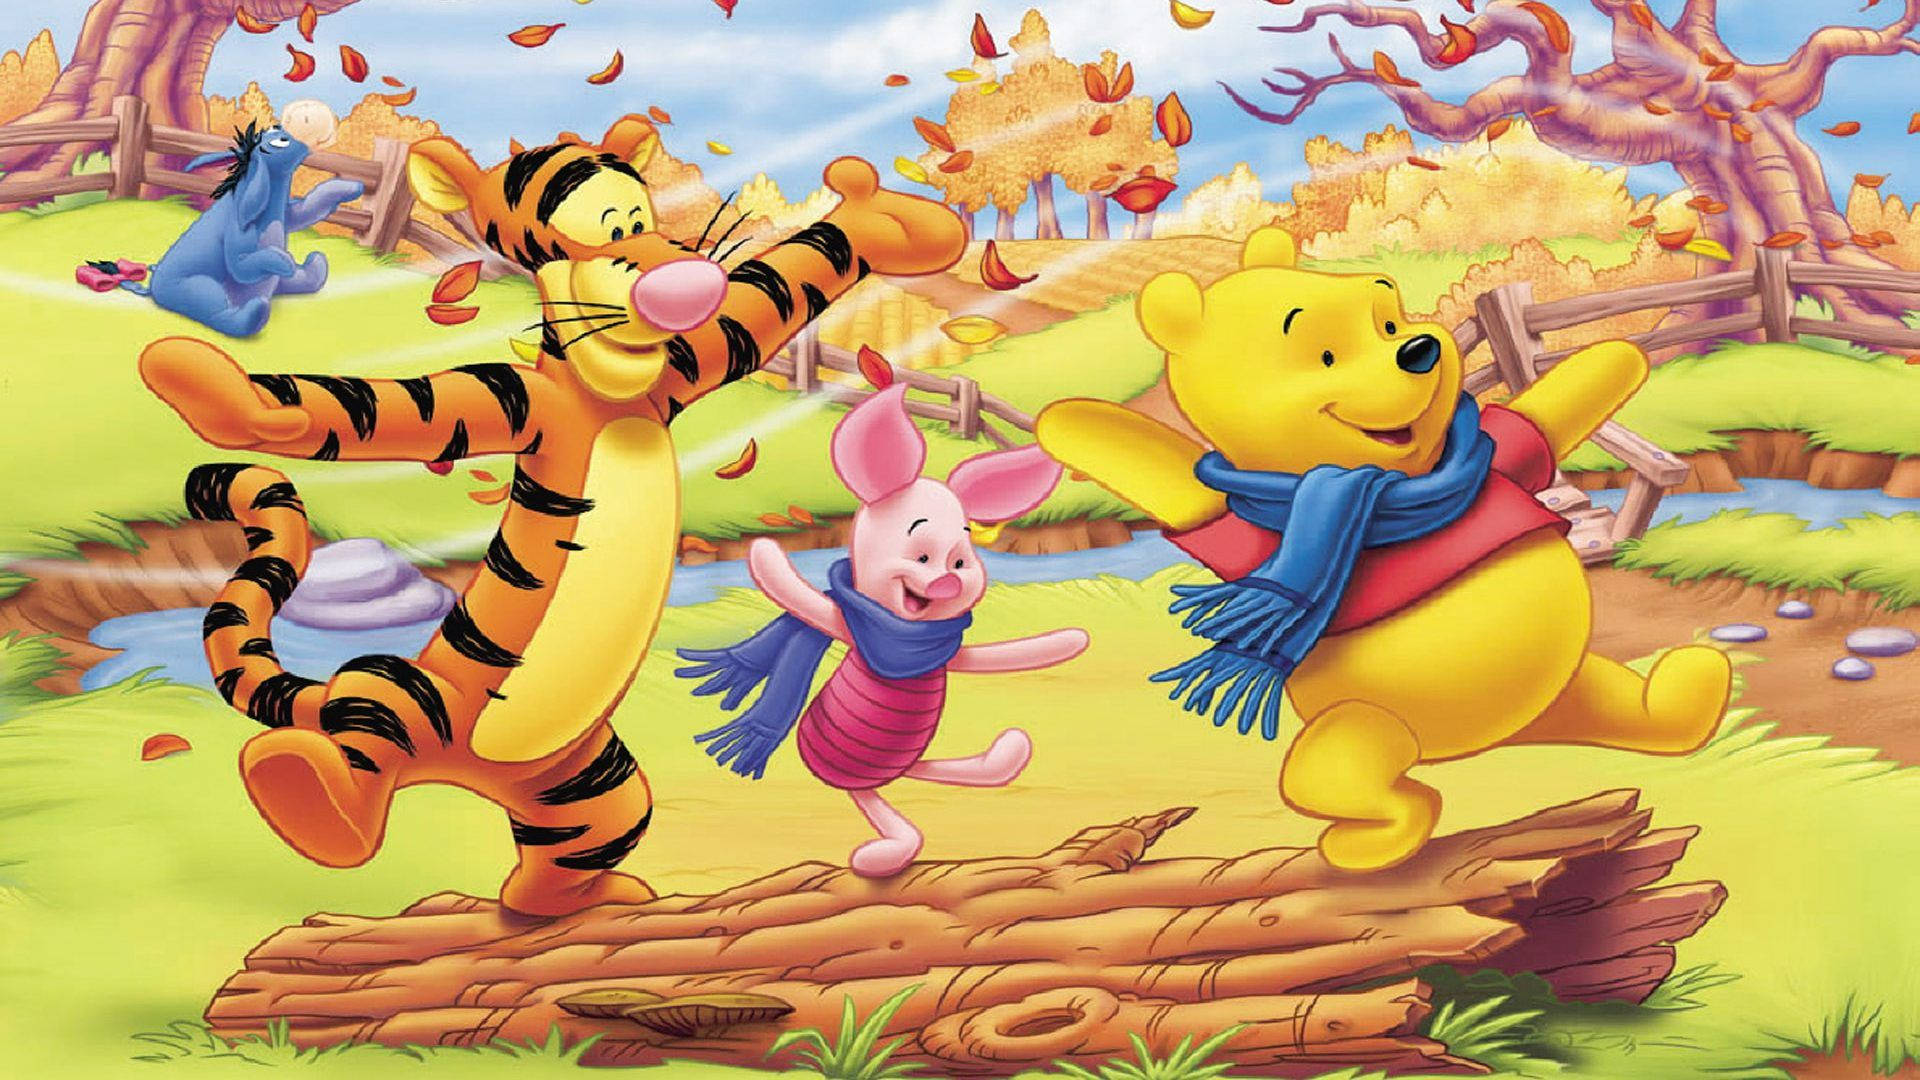 Winnie The Pooh And Friends In Hundred Acre Wood Wallpaper